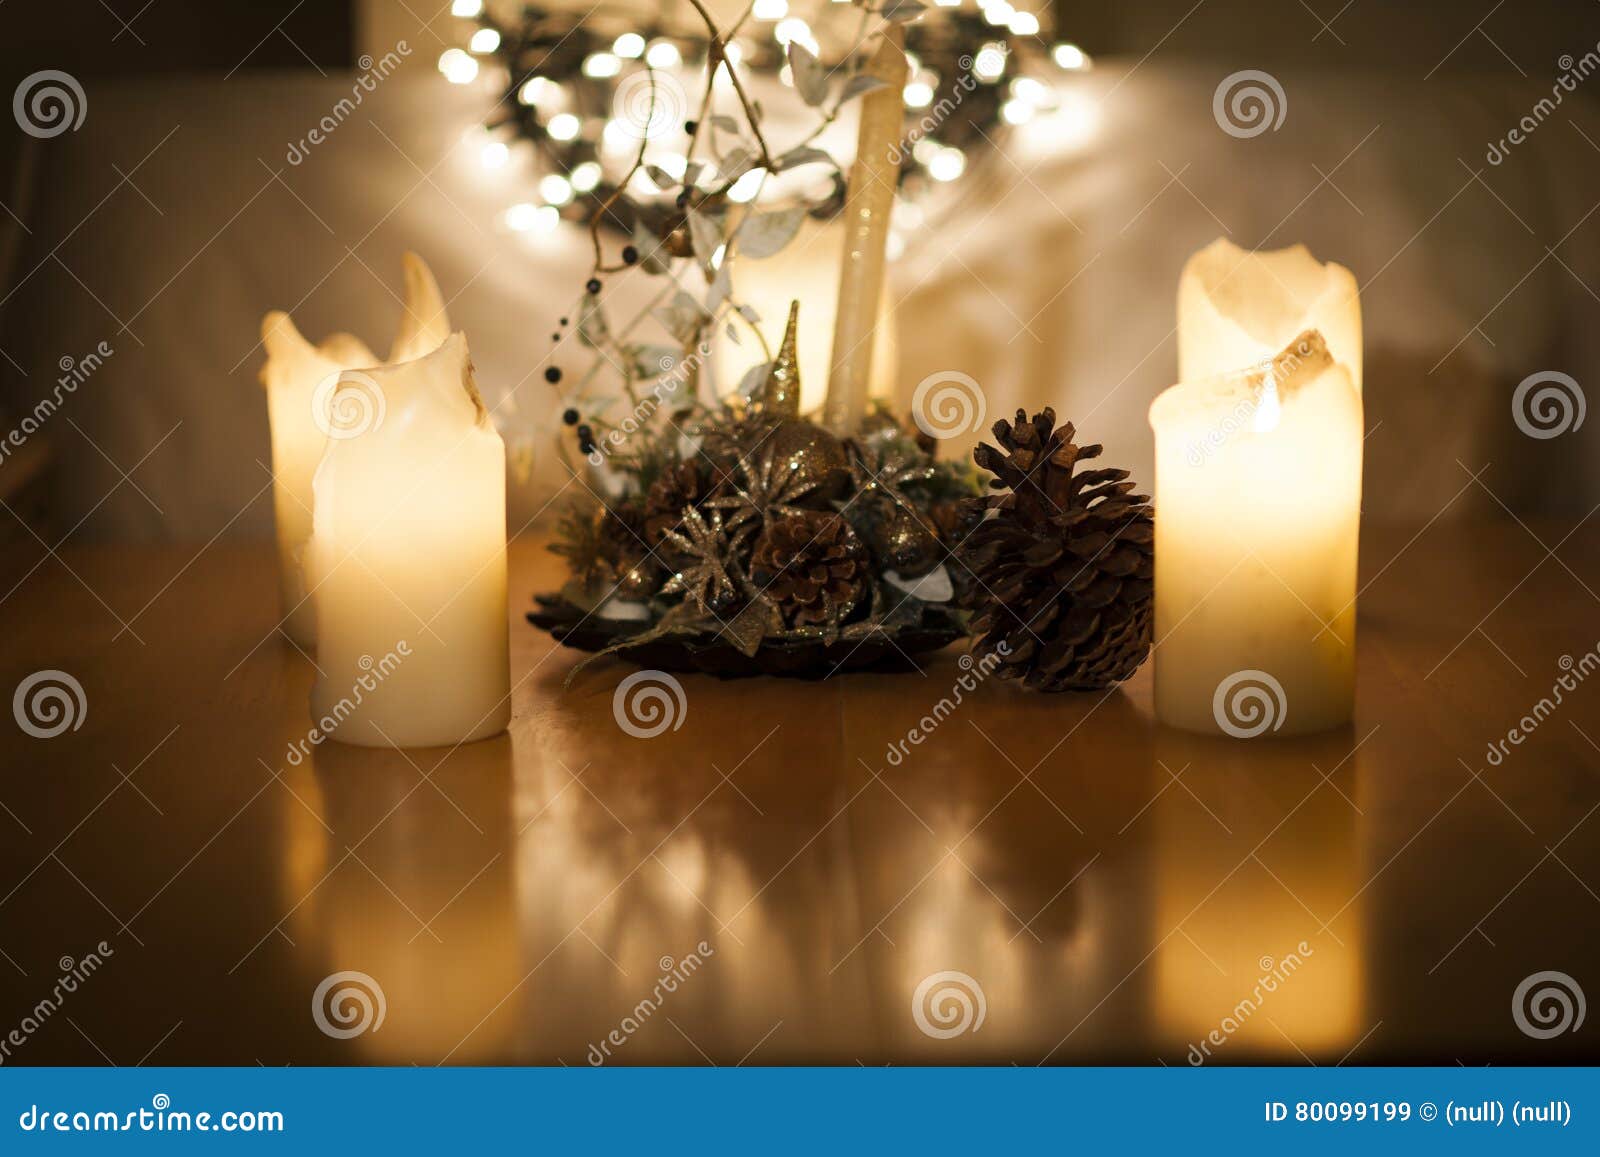 Candles, Christmas Lights and Decoration with Large Corn Stock Image ...